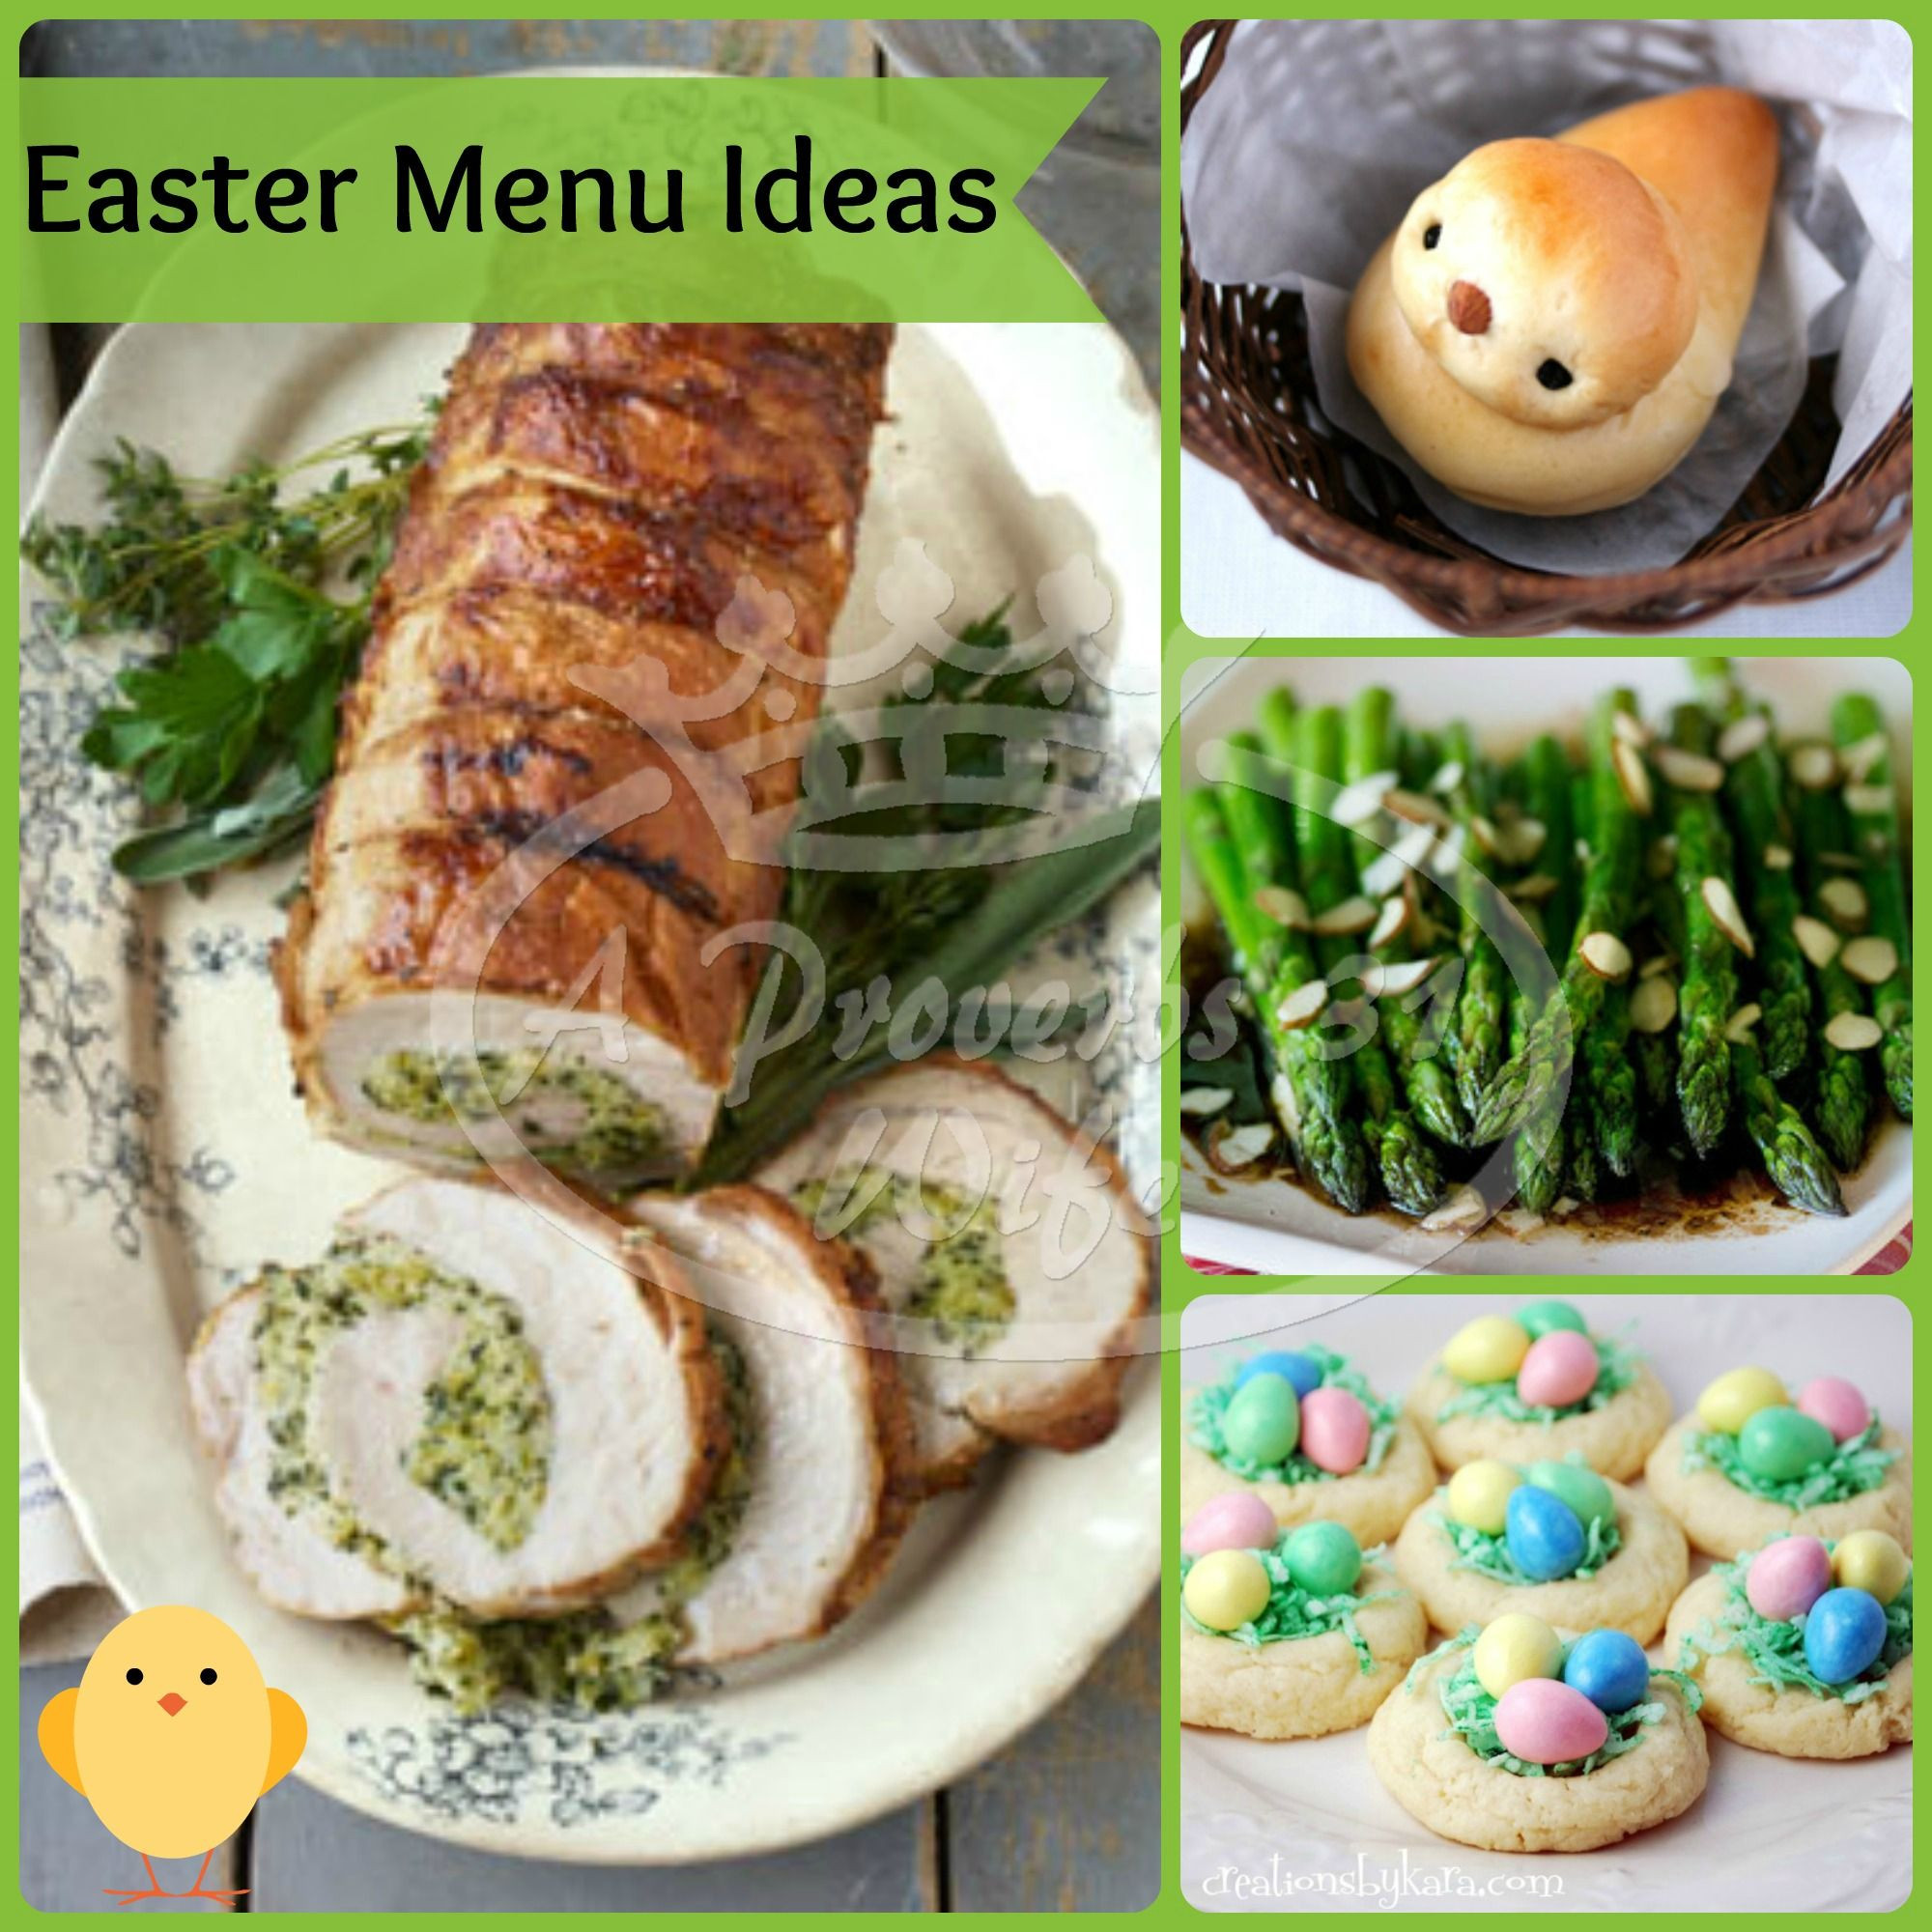 Easter Dinner Recipes
 Deep South Dish Southern Easter Menu Ideas And Recipes